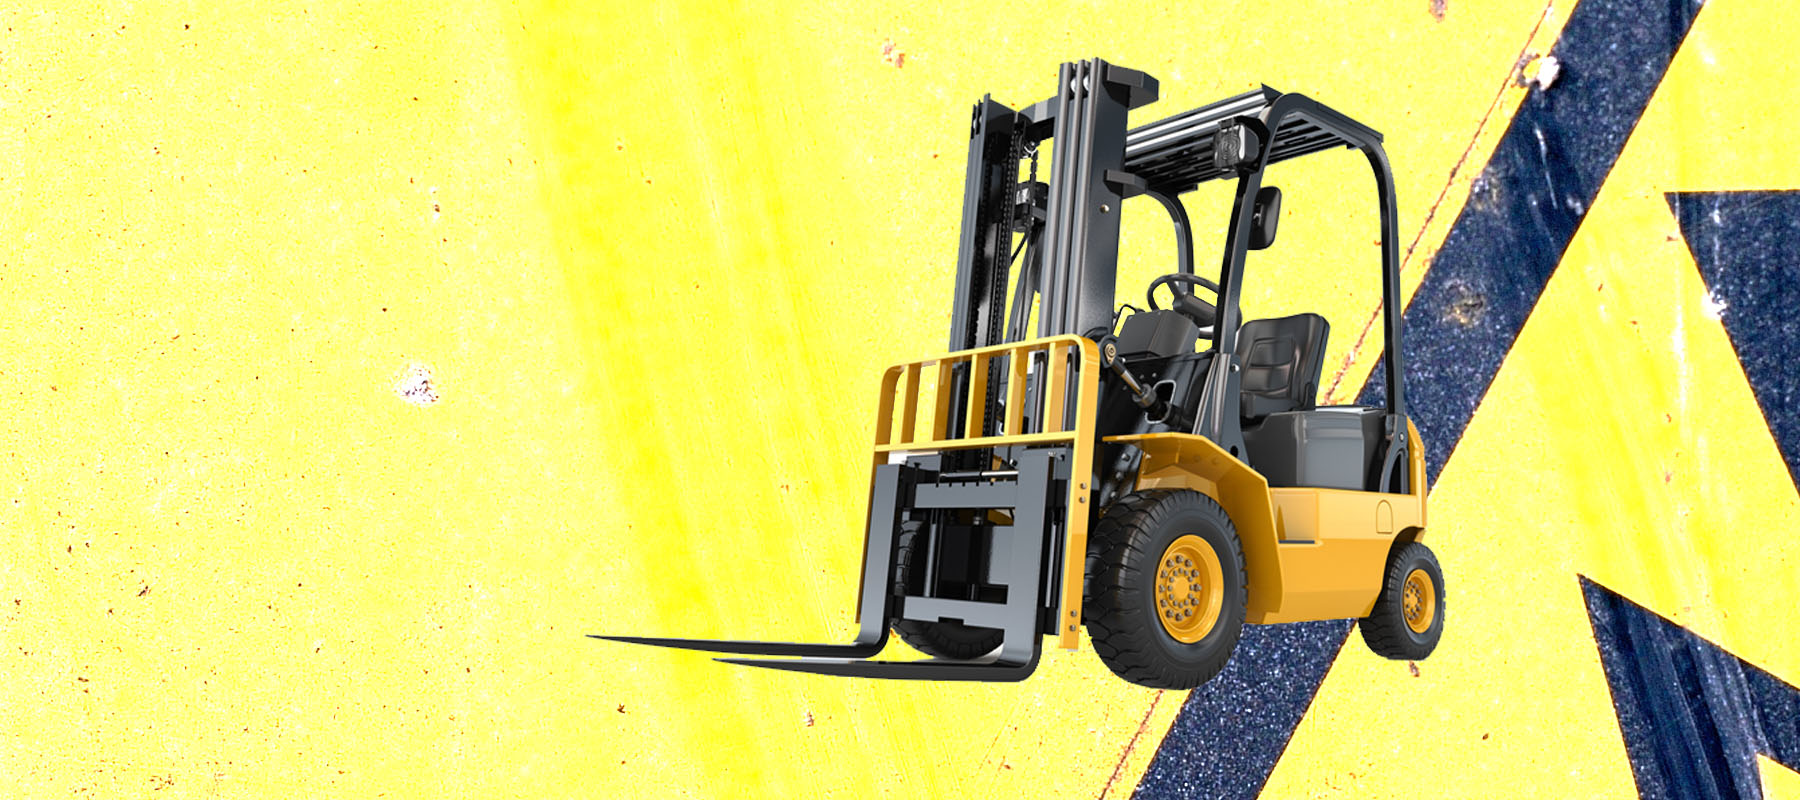 Forklift Truck Verification Of Competency Ohsa Occupational Health Services Australia